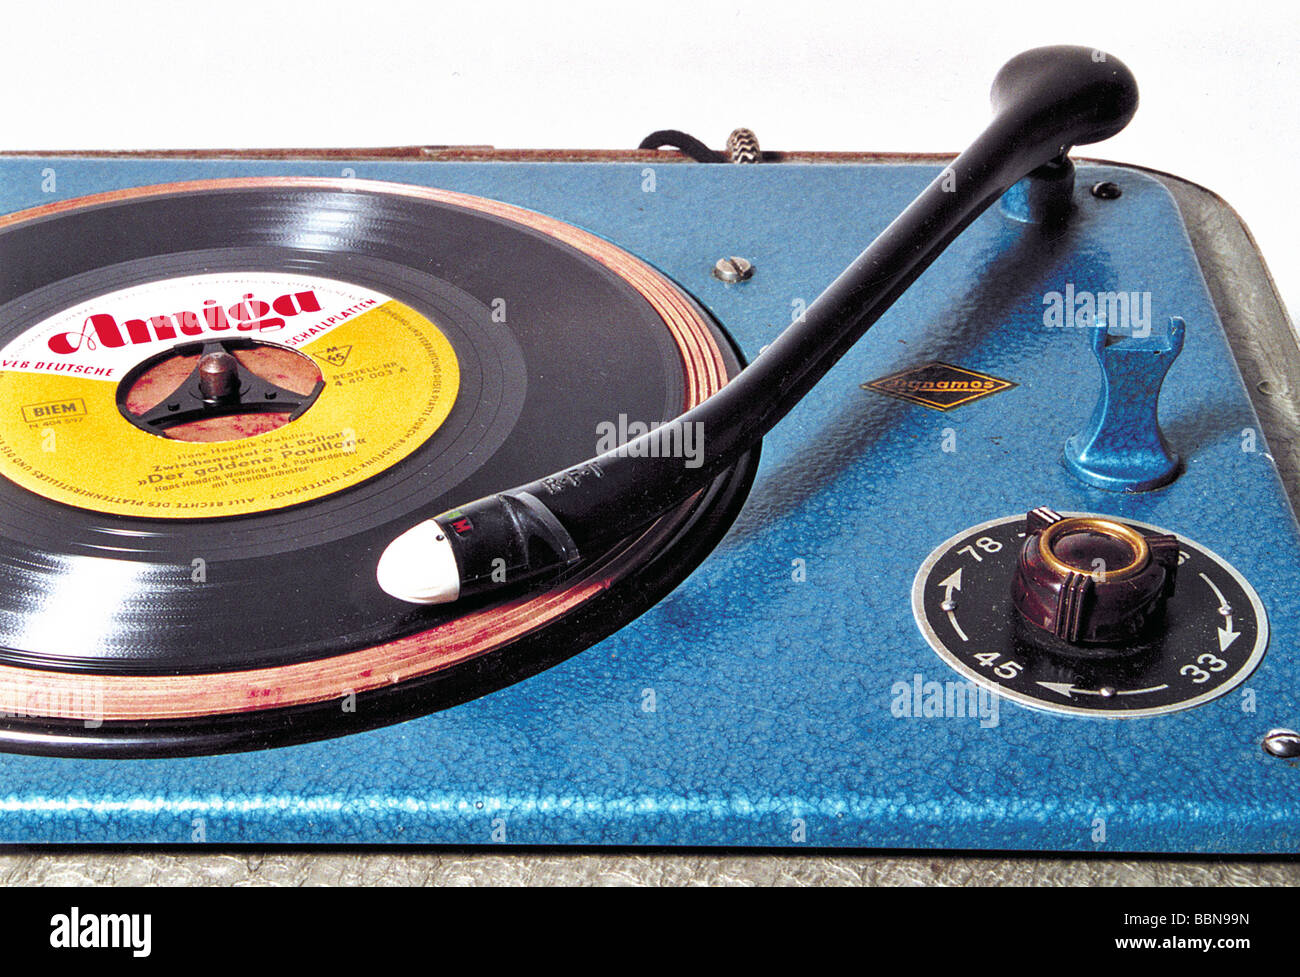 technics, record player, portable record player Dynamos, detail with record, made by Dynamos Apparatebau Hummel & Septius Dresden, GDR, circa 1953, Stock Photo